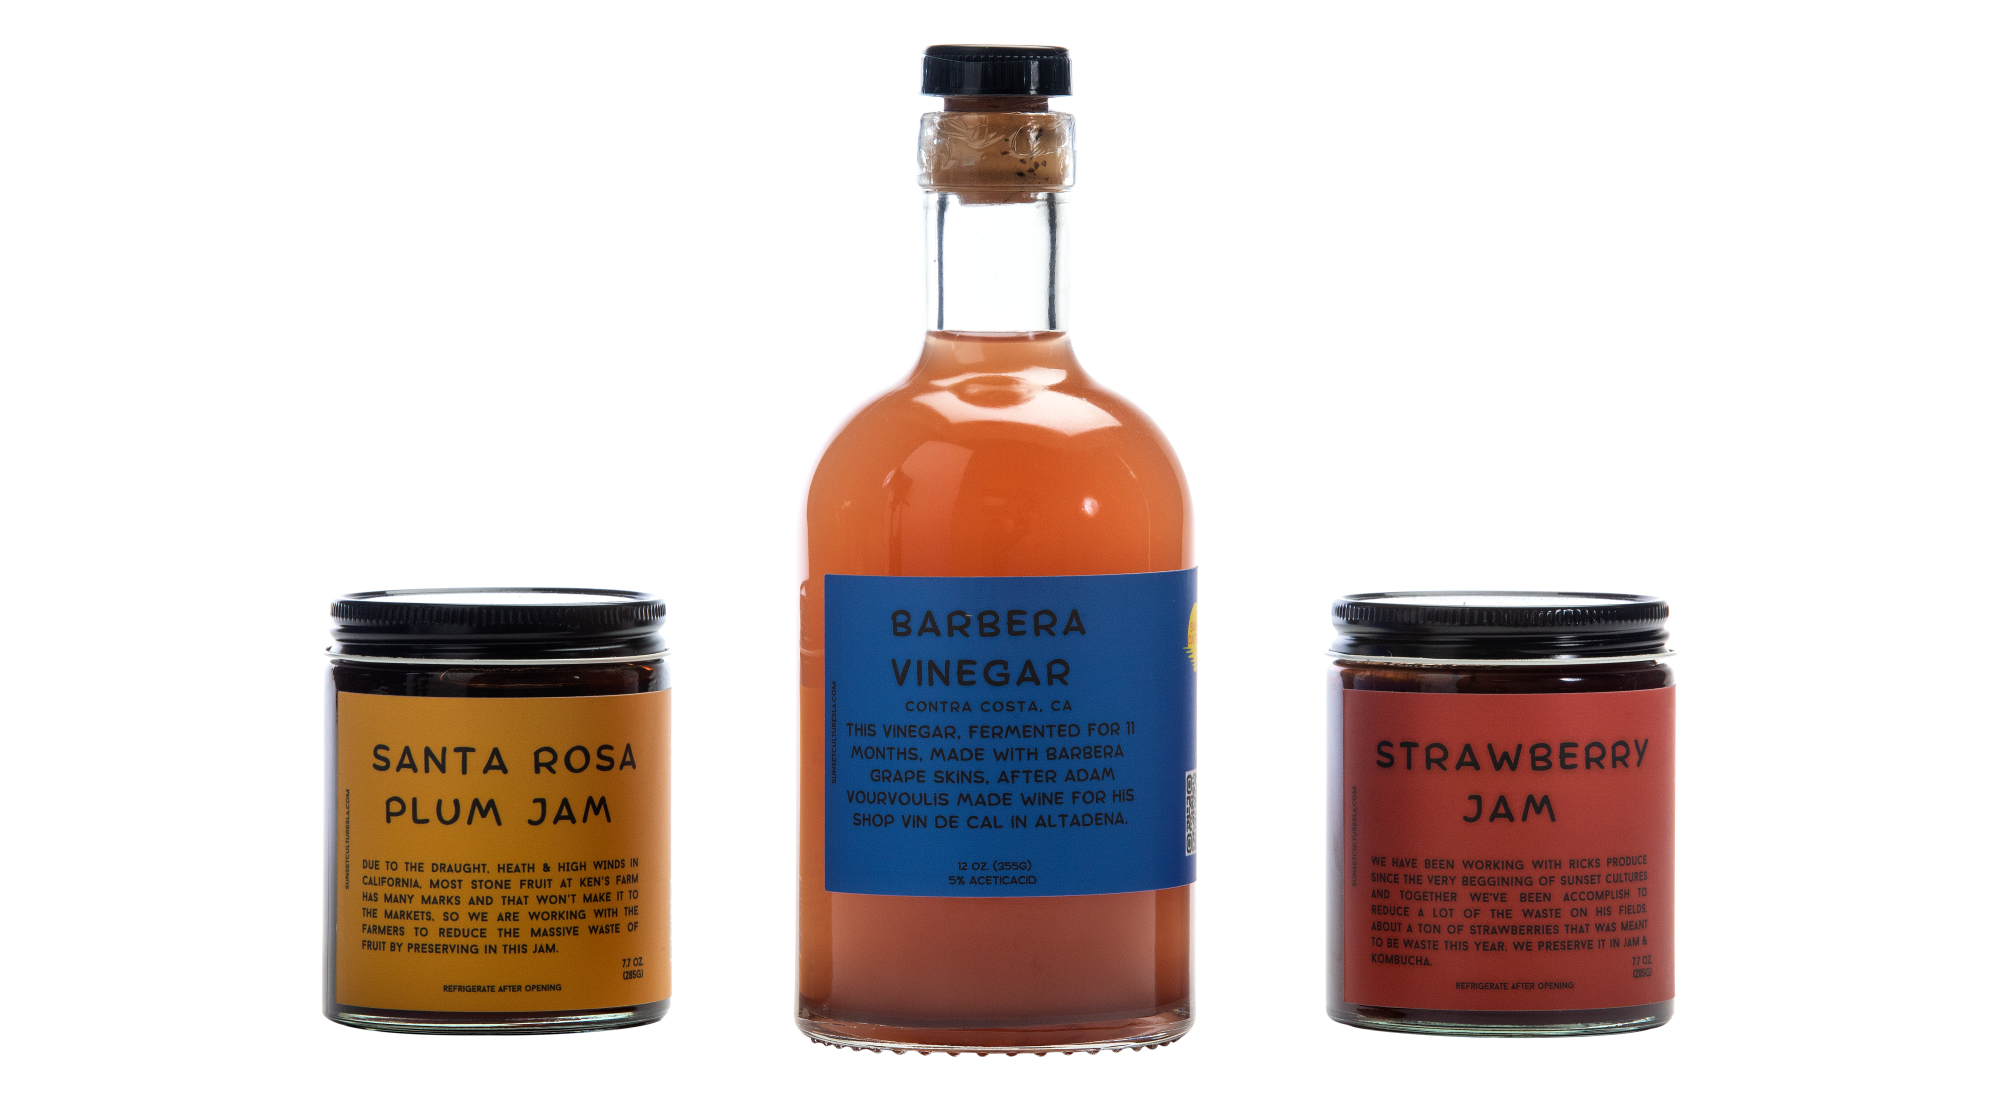 Two jars of plum and strawberry jam flank a bottle of vinegar by Sunset Cultures